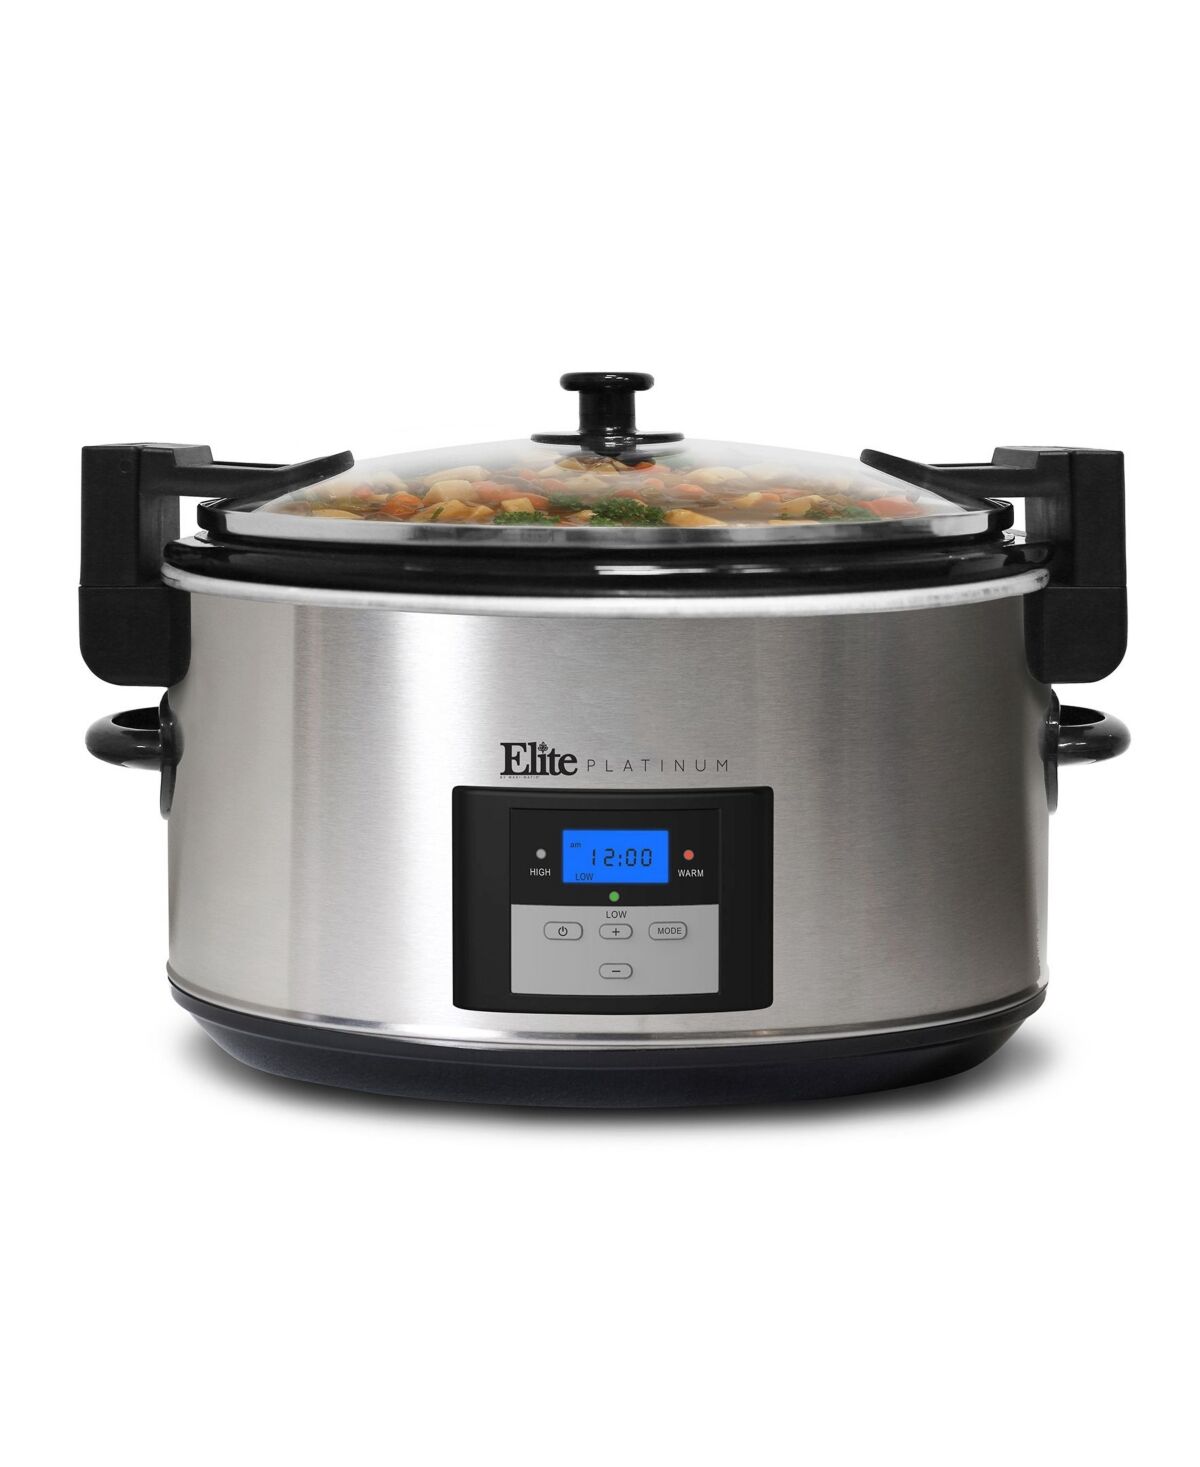 Elite Gourmet Elite Platinum 8.5 Quart Stainless Steel Programmable Slow Cooker with locking lid - Stainless Steel